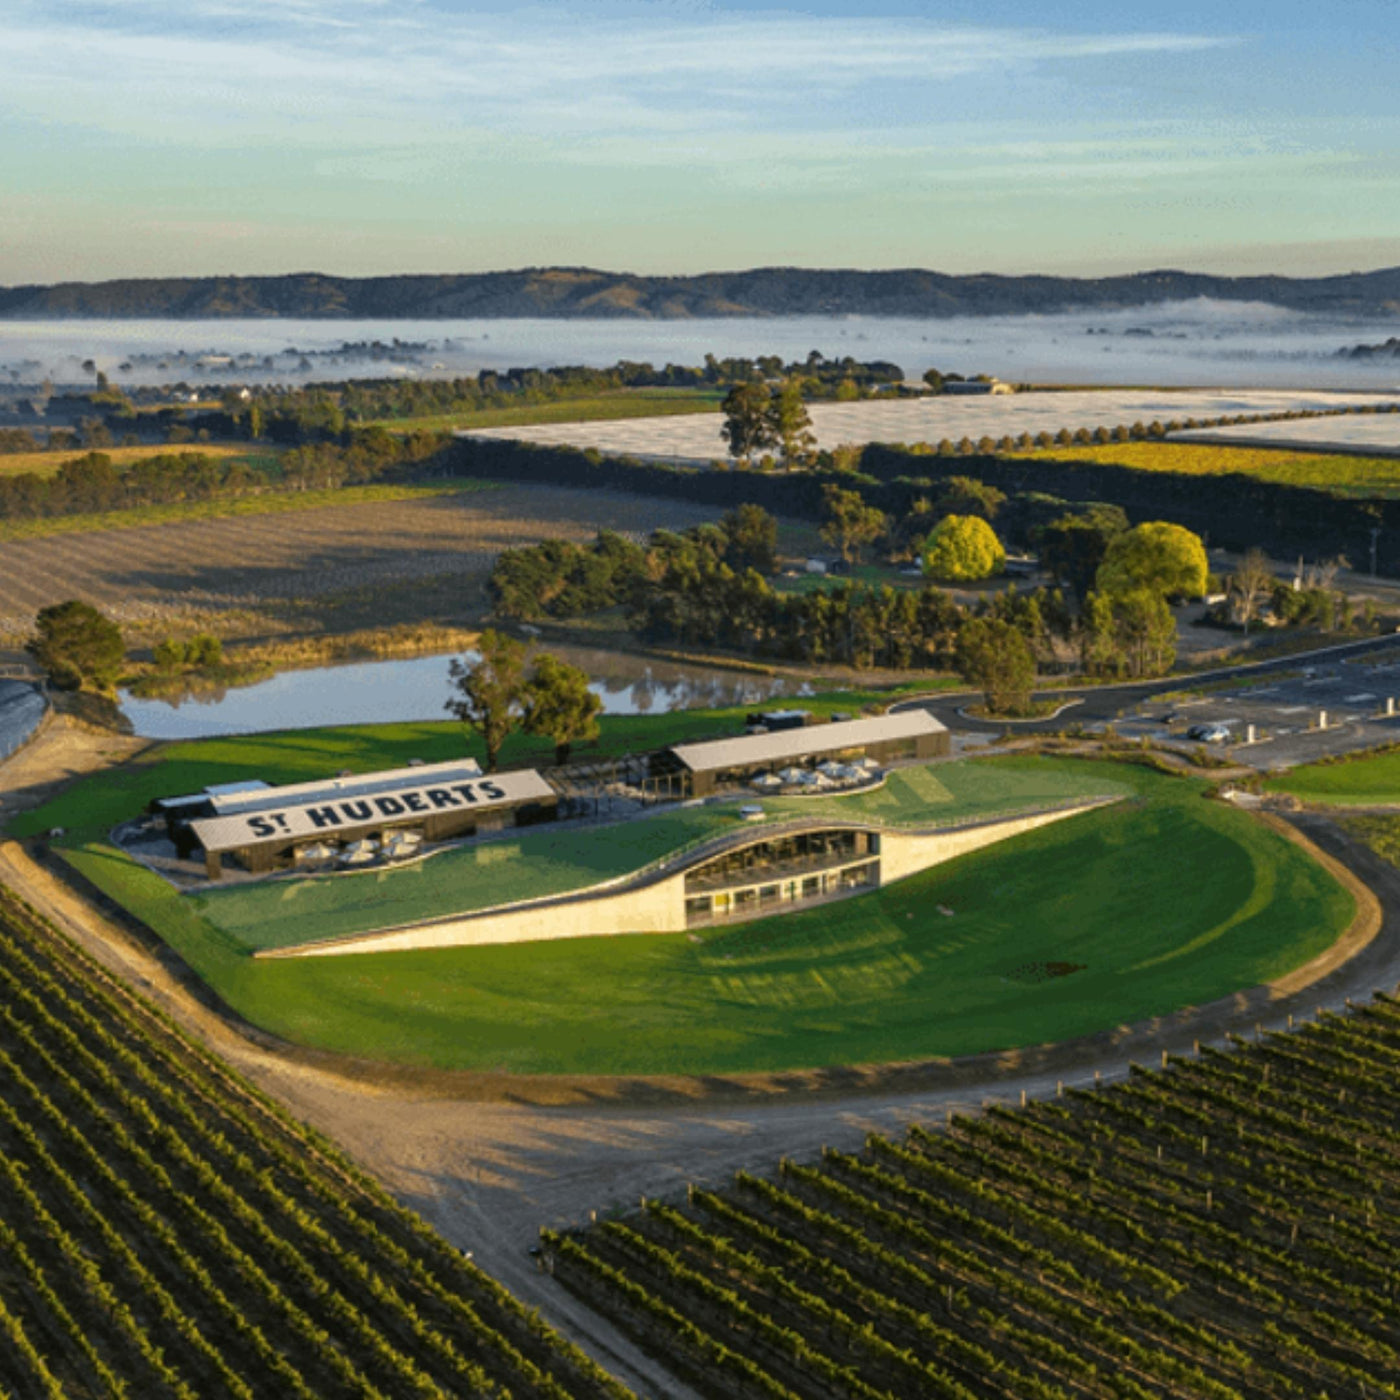 St Hubert's Winery Lunch Tour By Helicopter in the Yarra Valley